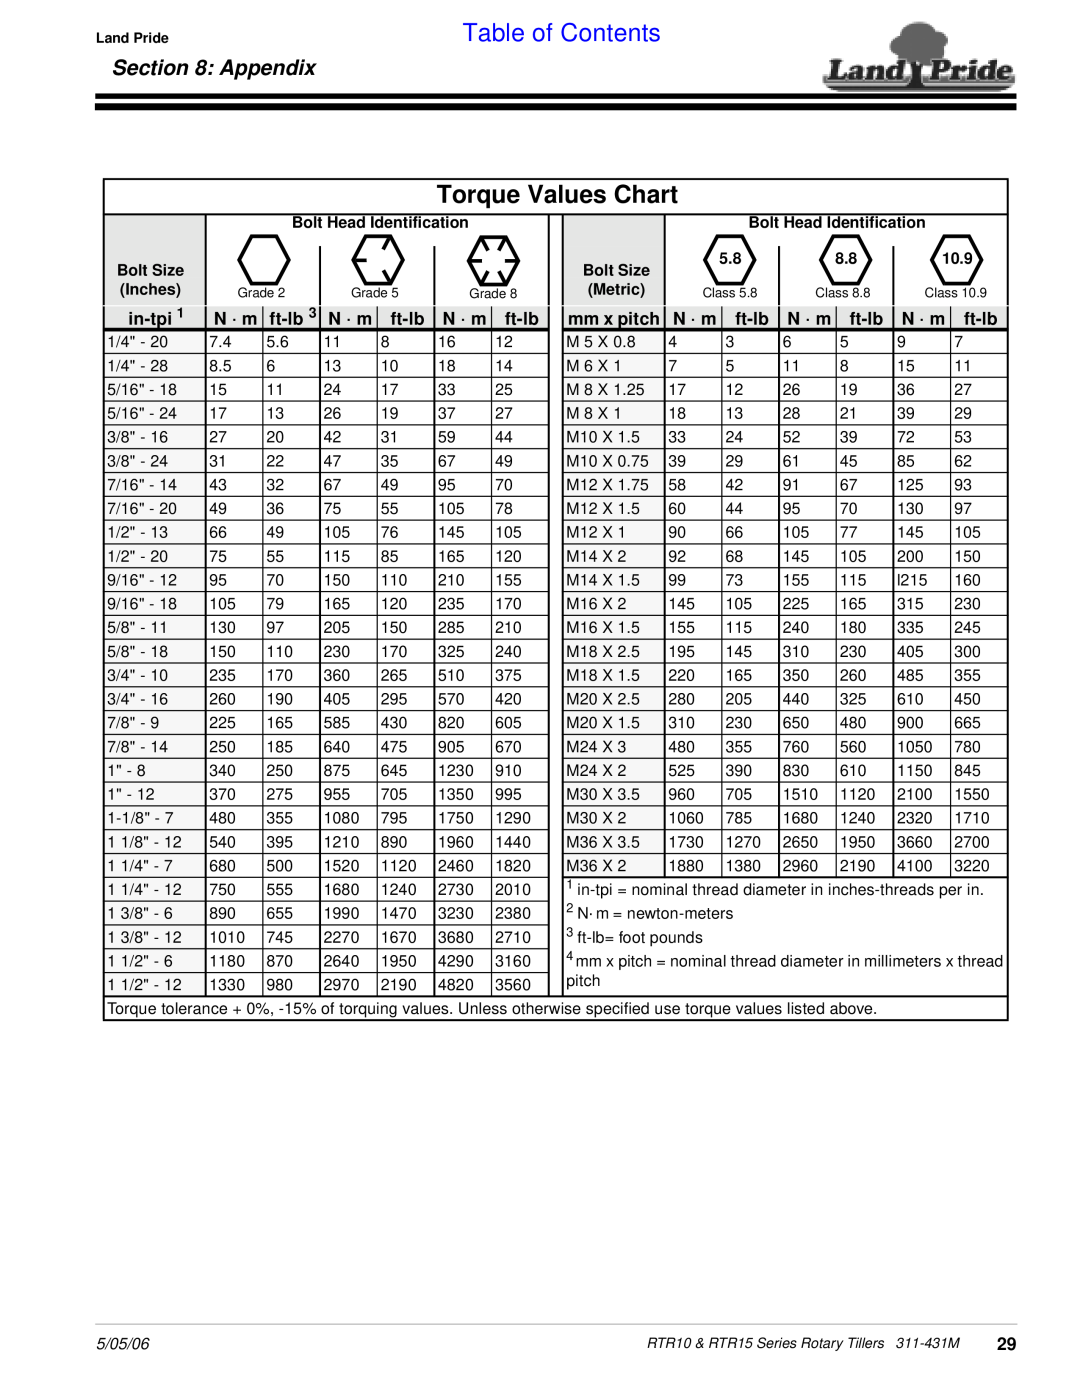 Land Pride RTR1058, RTR1550, RTR1558, RTR1042, RTR1050, RTR1542 manual Torque Values Chart, Appendix, Table of Contents 